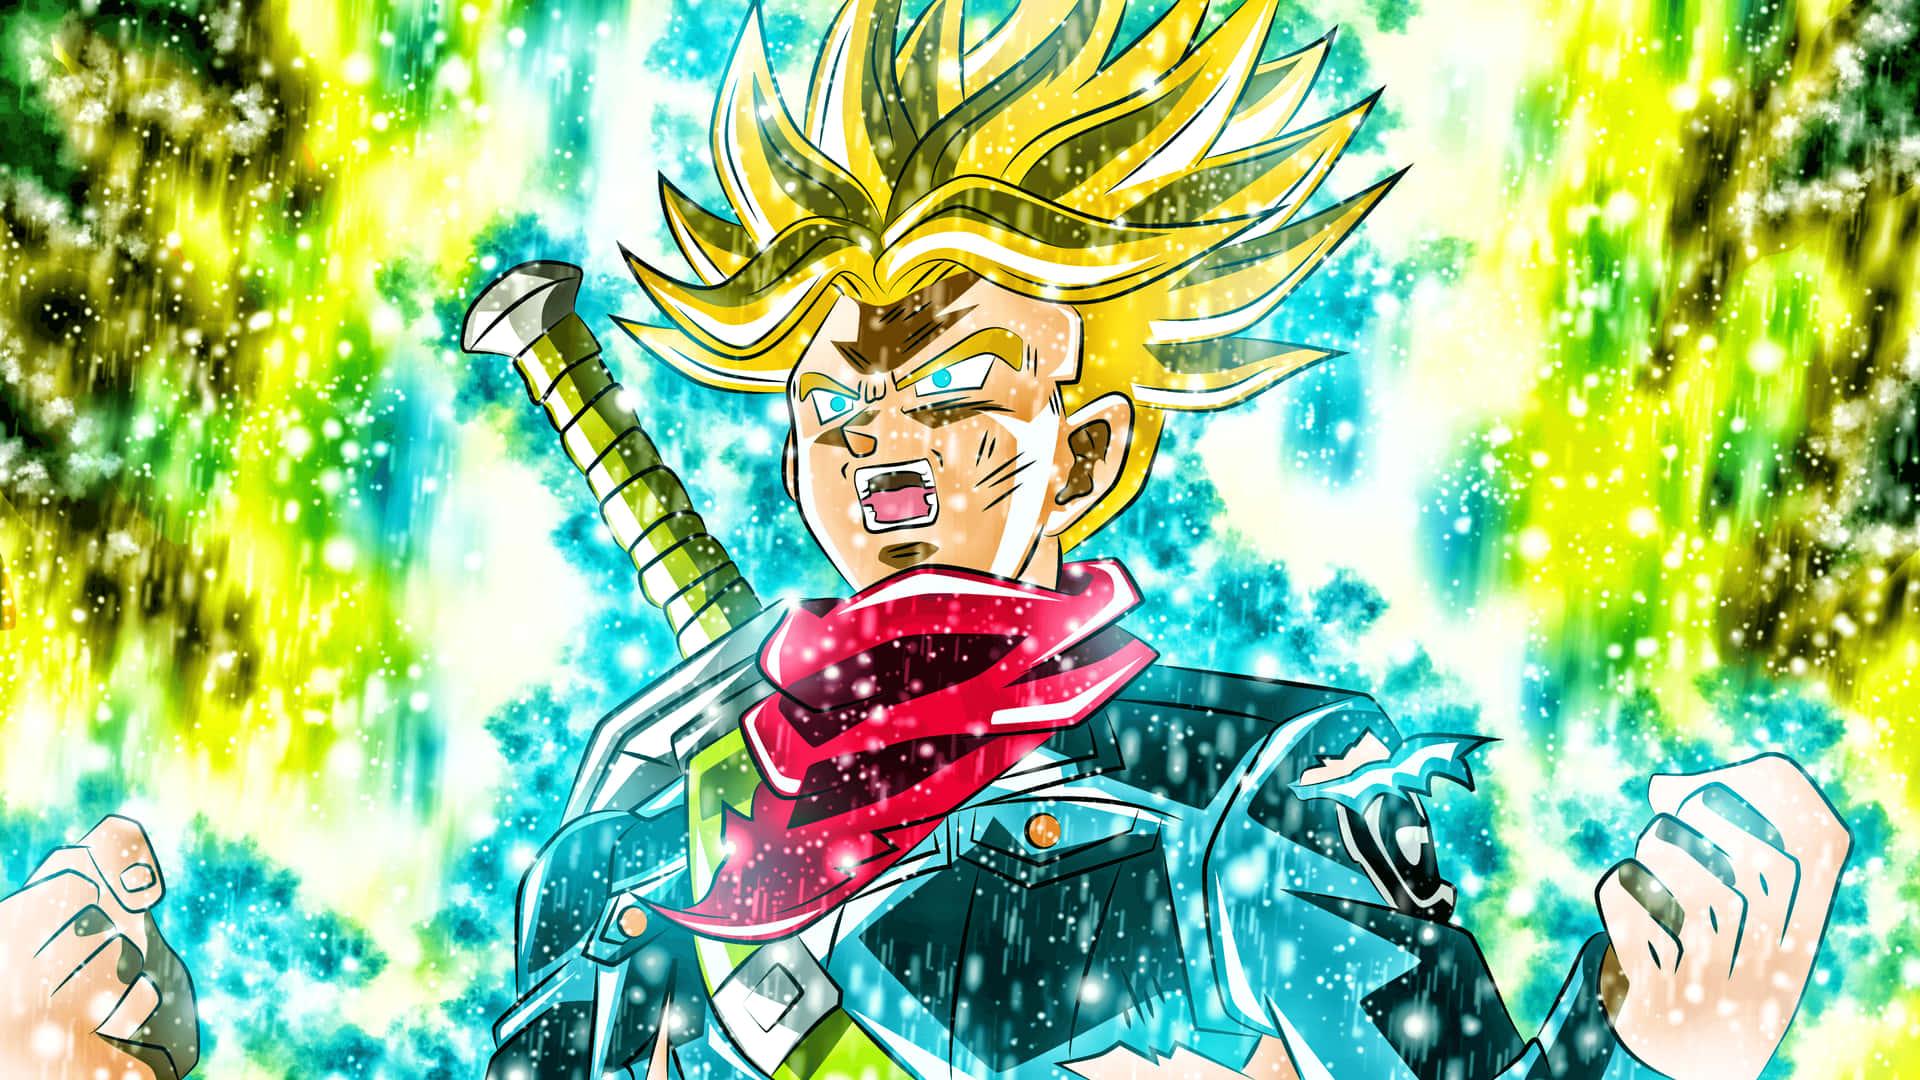 "The Hero Who Changed History: Dragon Ball Z Trunks" Wallpaper